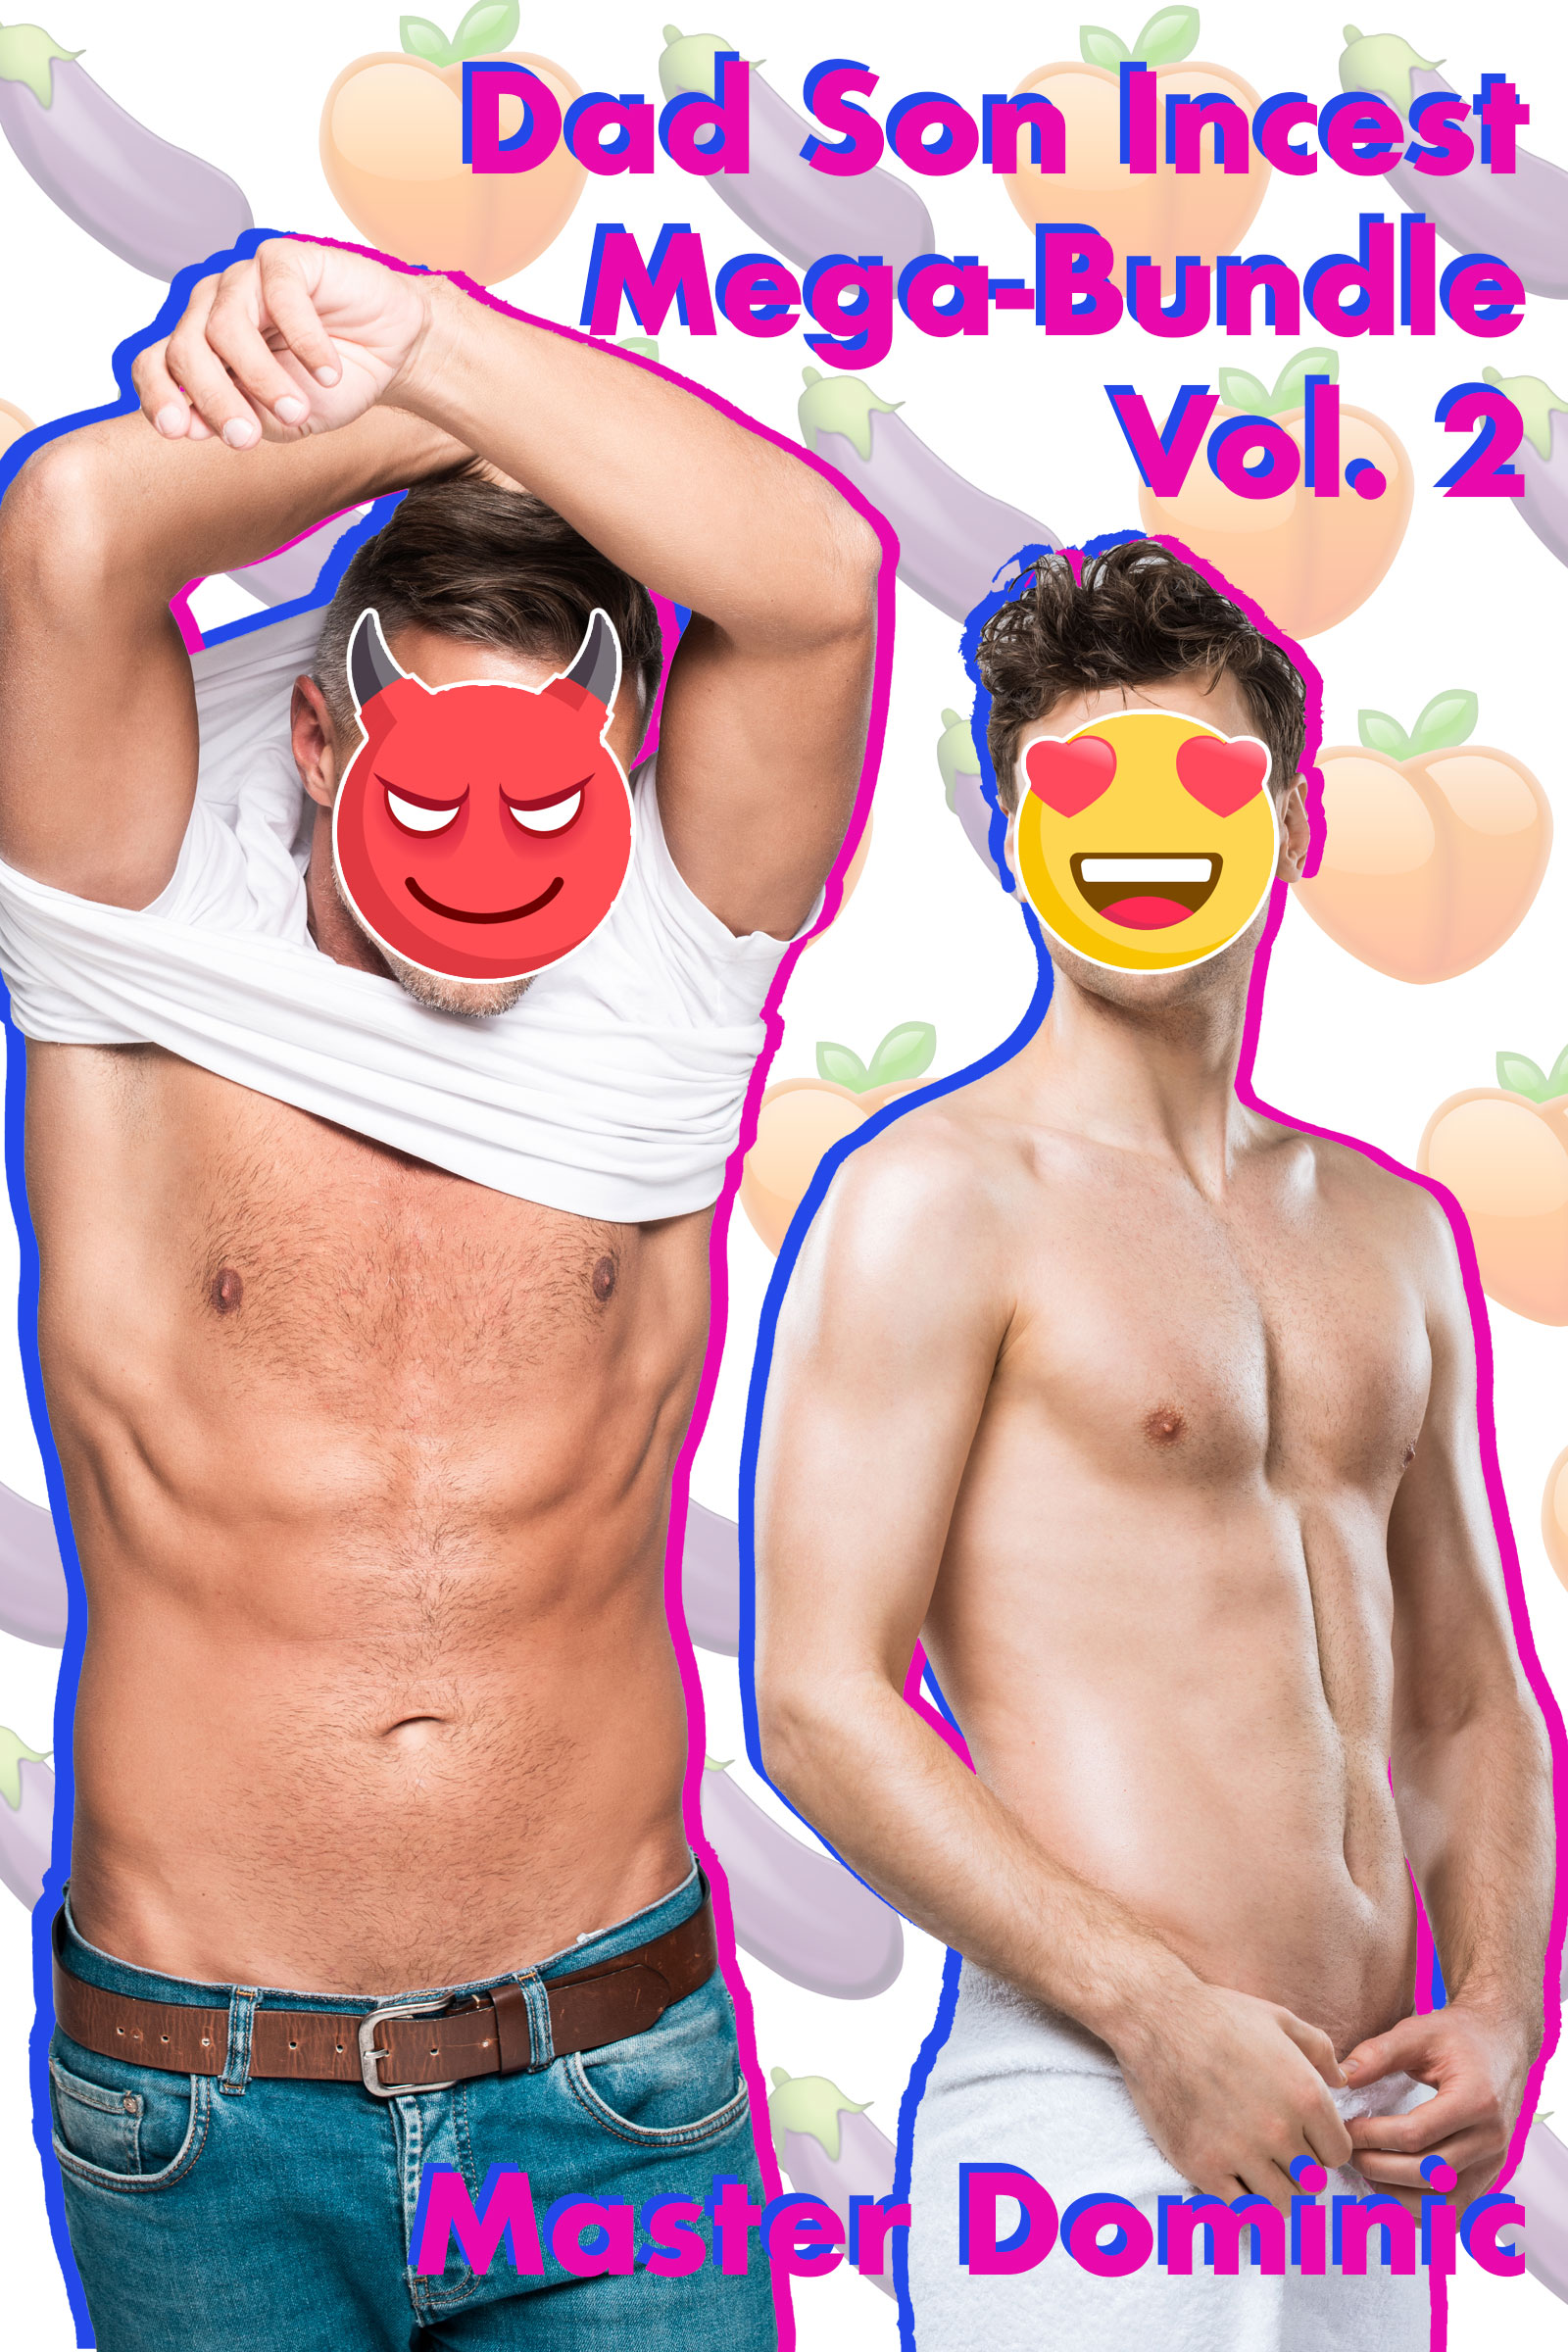 Dad Son Incest Mega-Bundle Volume 2: 8 Taboo Stories and 2 Taboo Novels of  Dads Doing Their Sons | Dirty Gay Erotica from Master Dominic